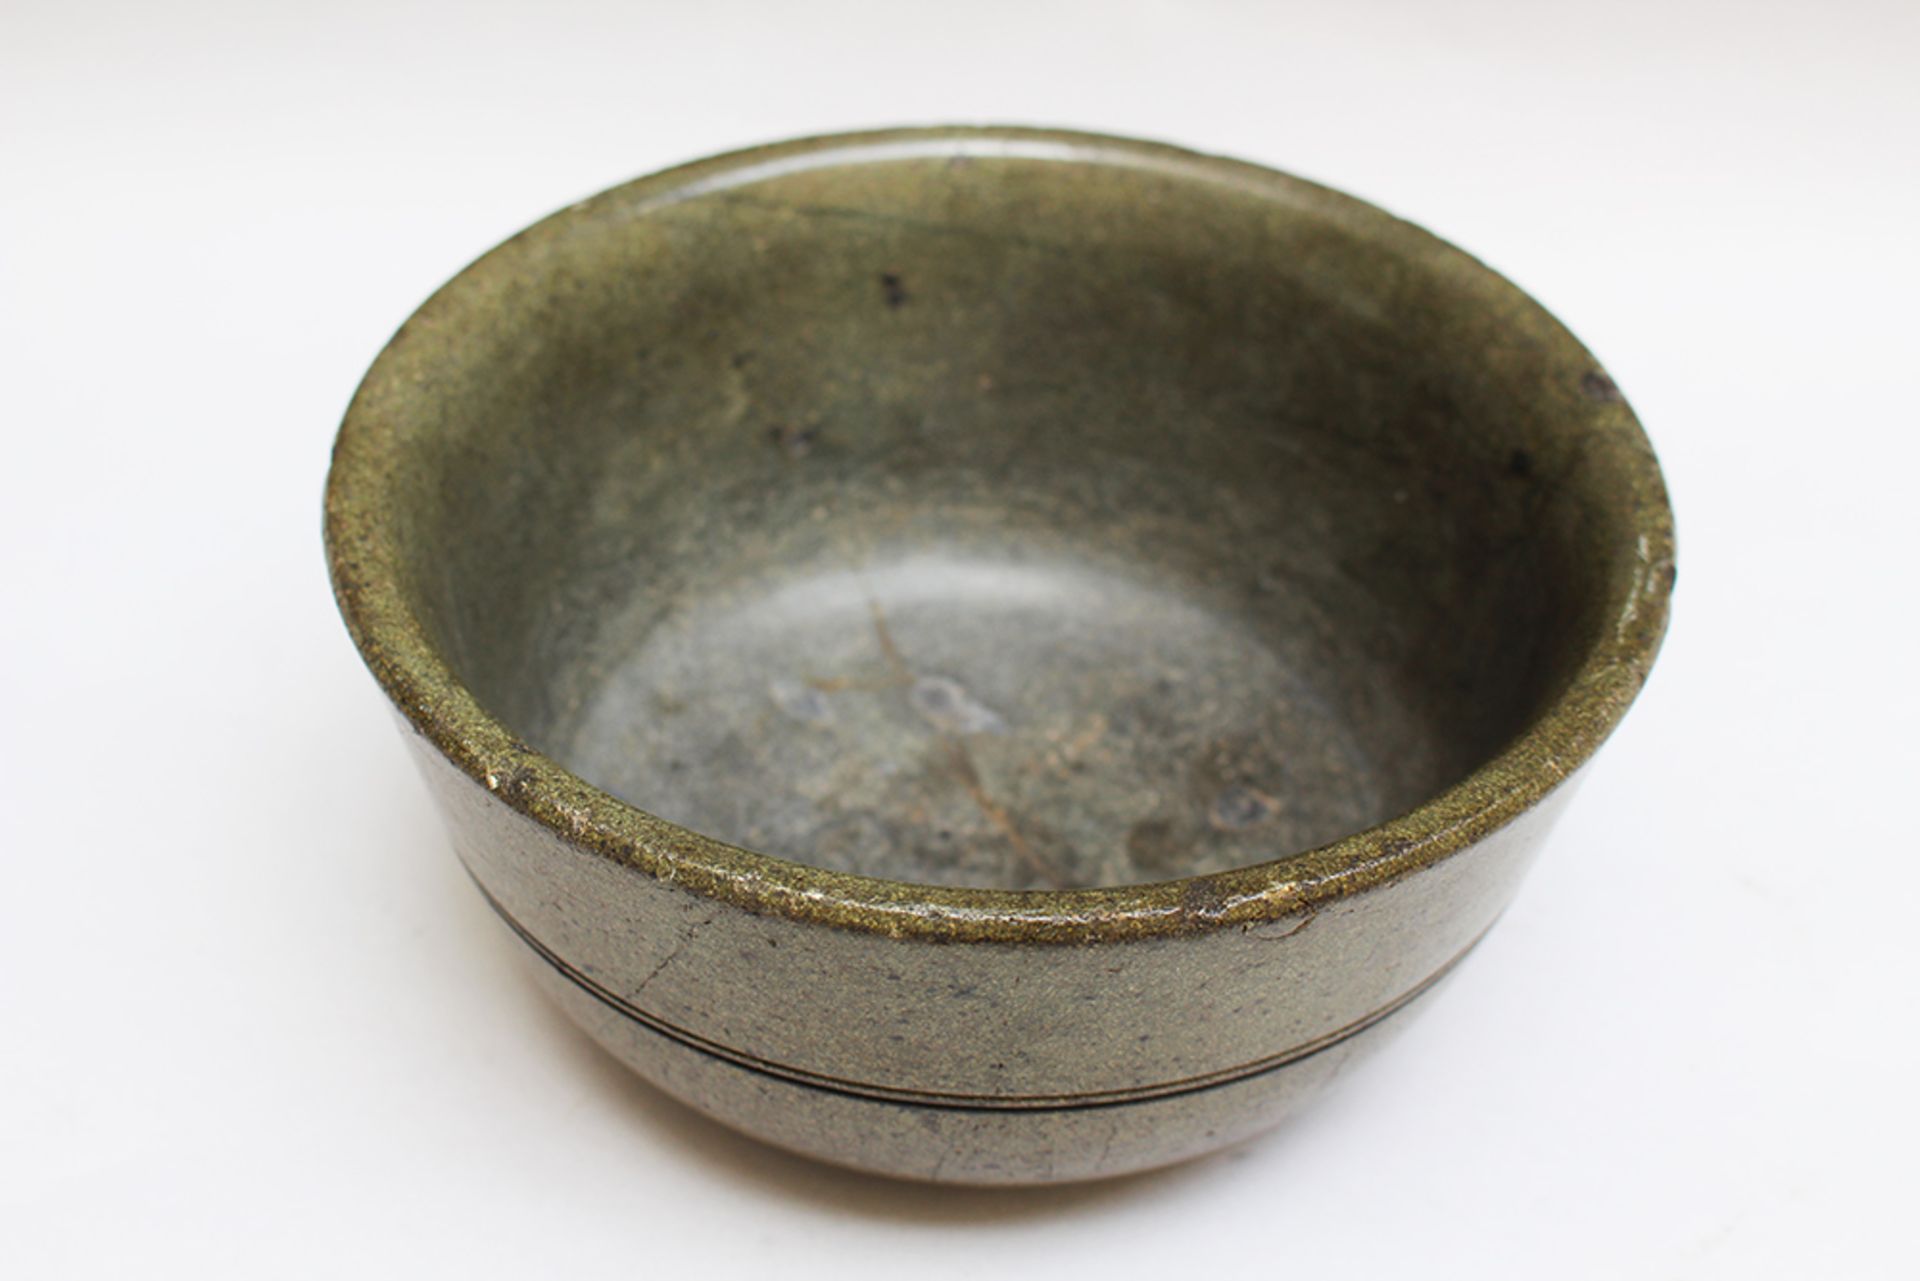 Apothecary bowl, grey/green serpentine polished and fluted original patina, early 18th Century. 19 c